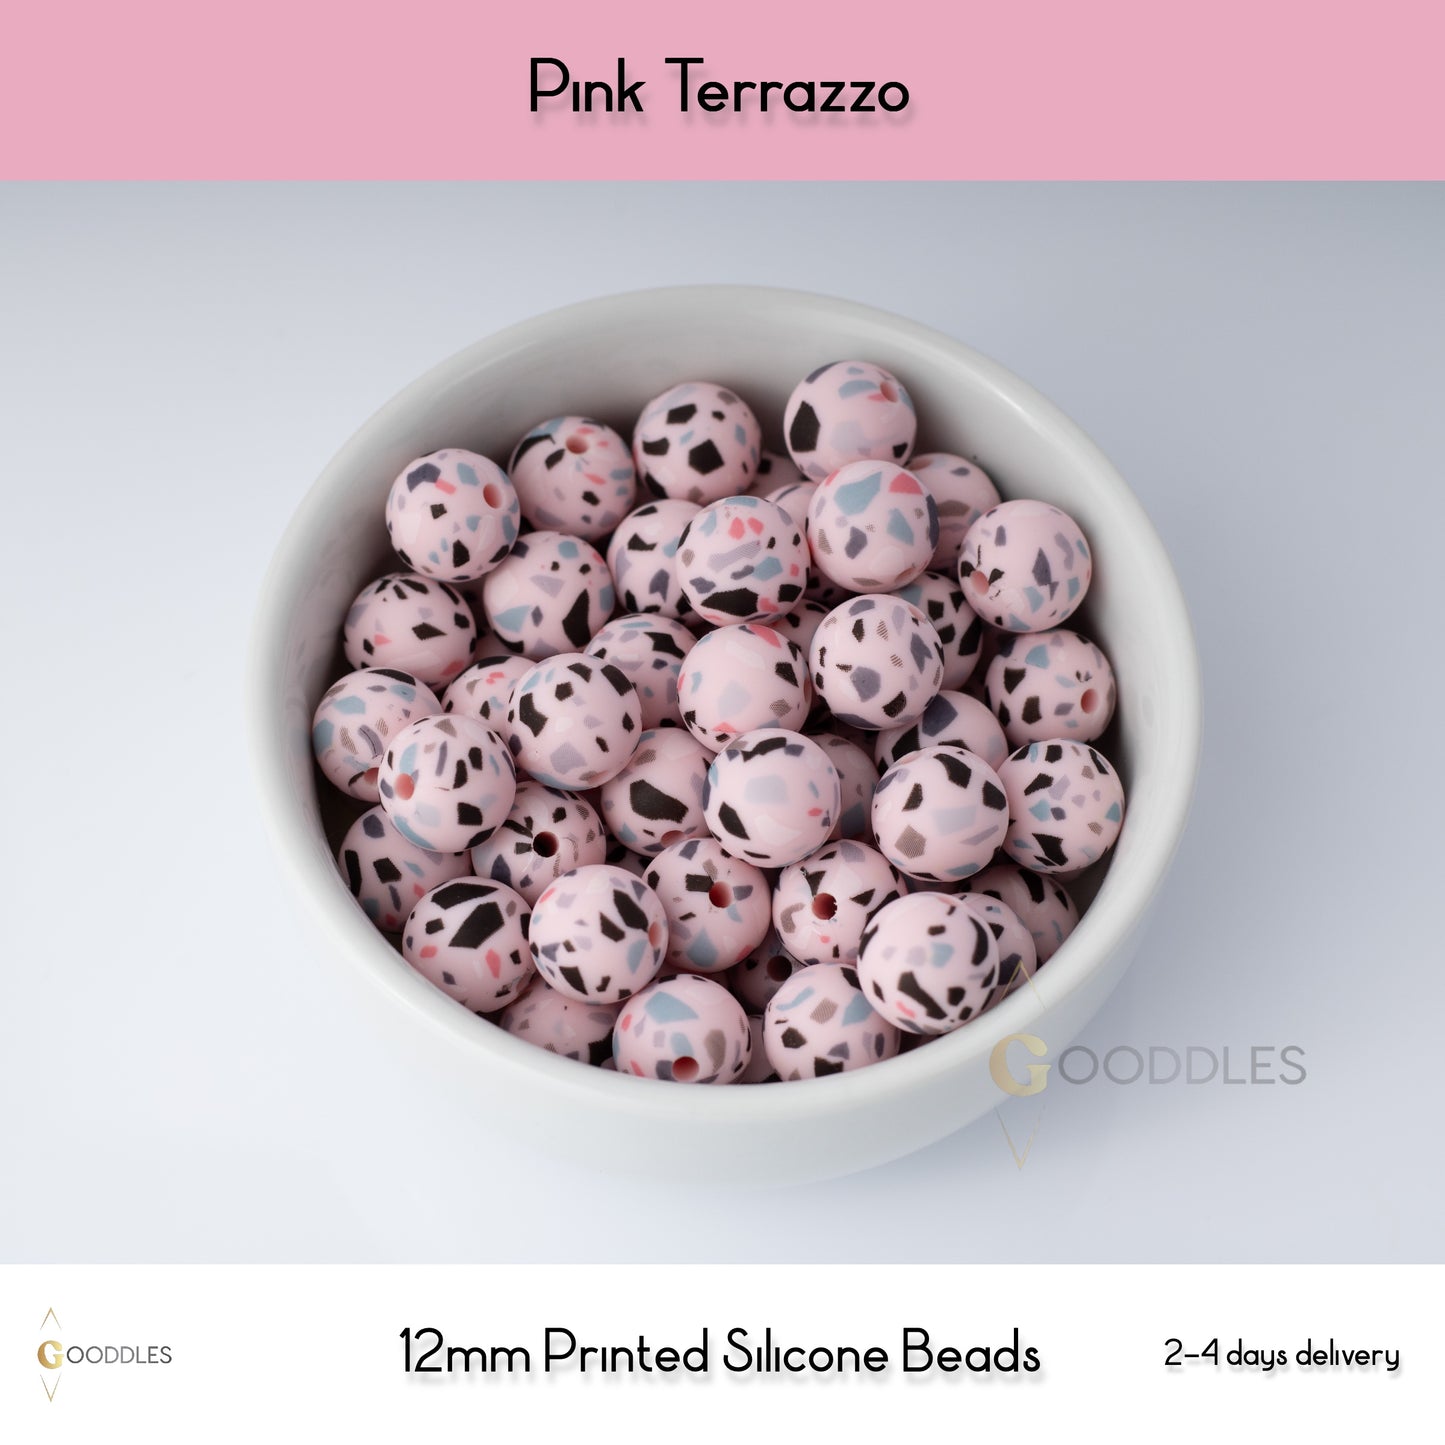 5pcs, Pink Terrazzo Silicone Beads Printed Round Silicone Beads